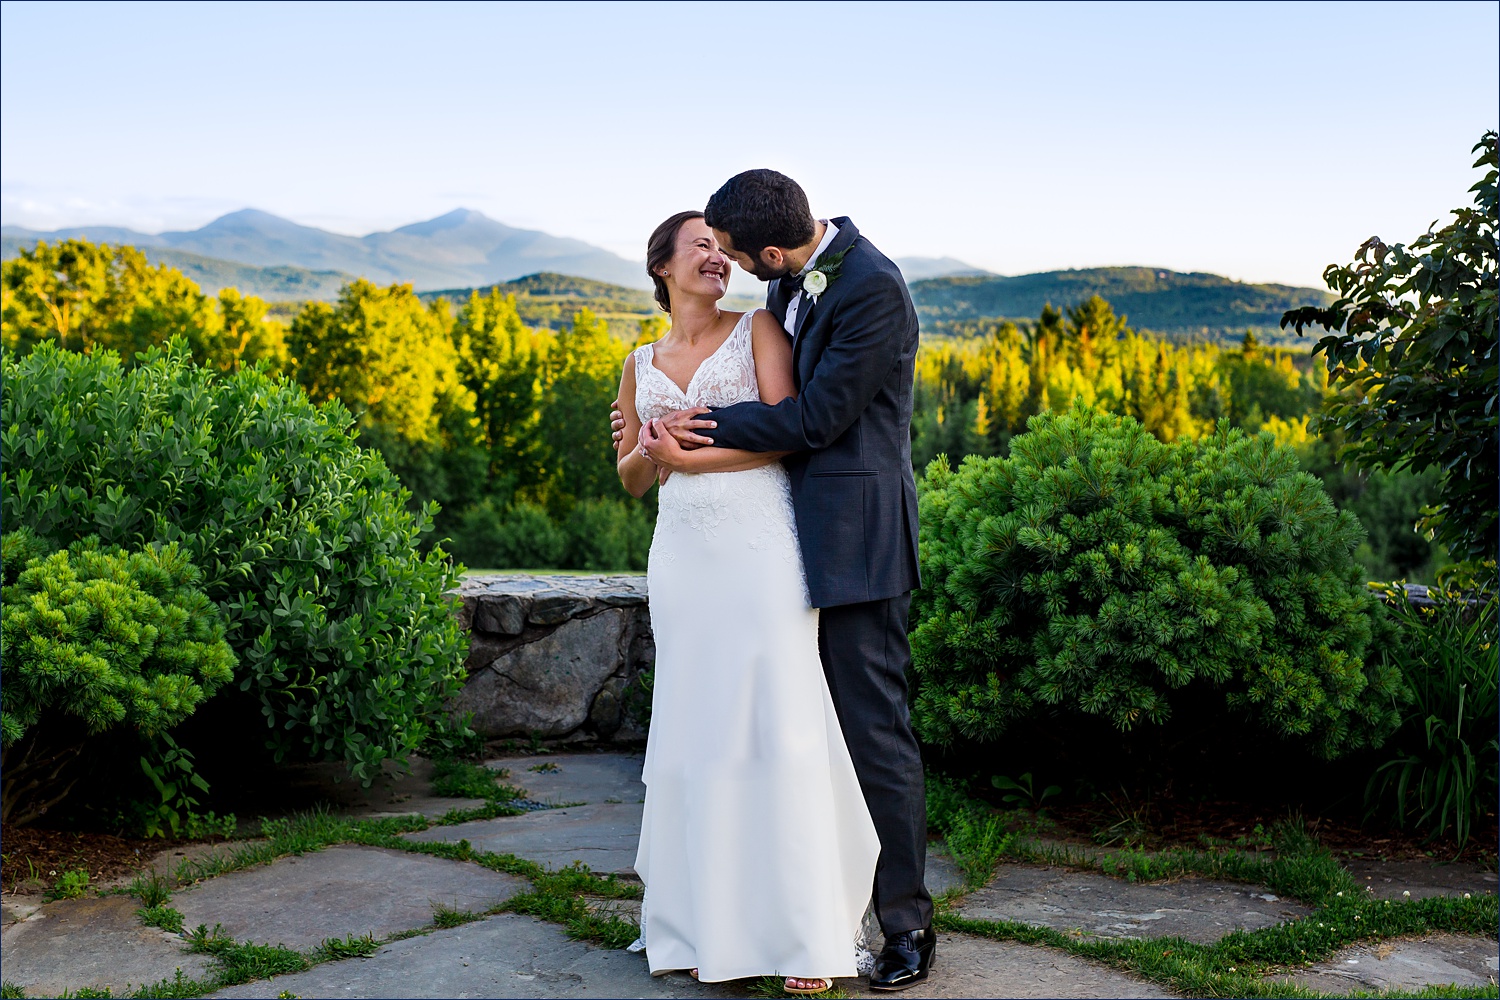 The bride and groom get a moment together at the Mountain View Grand Resort in New Hampshire